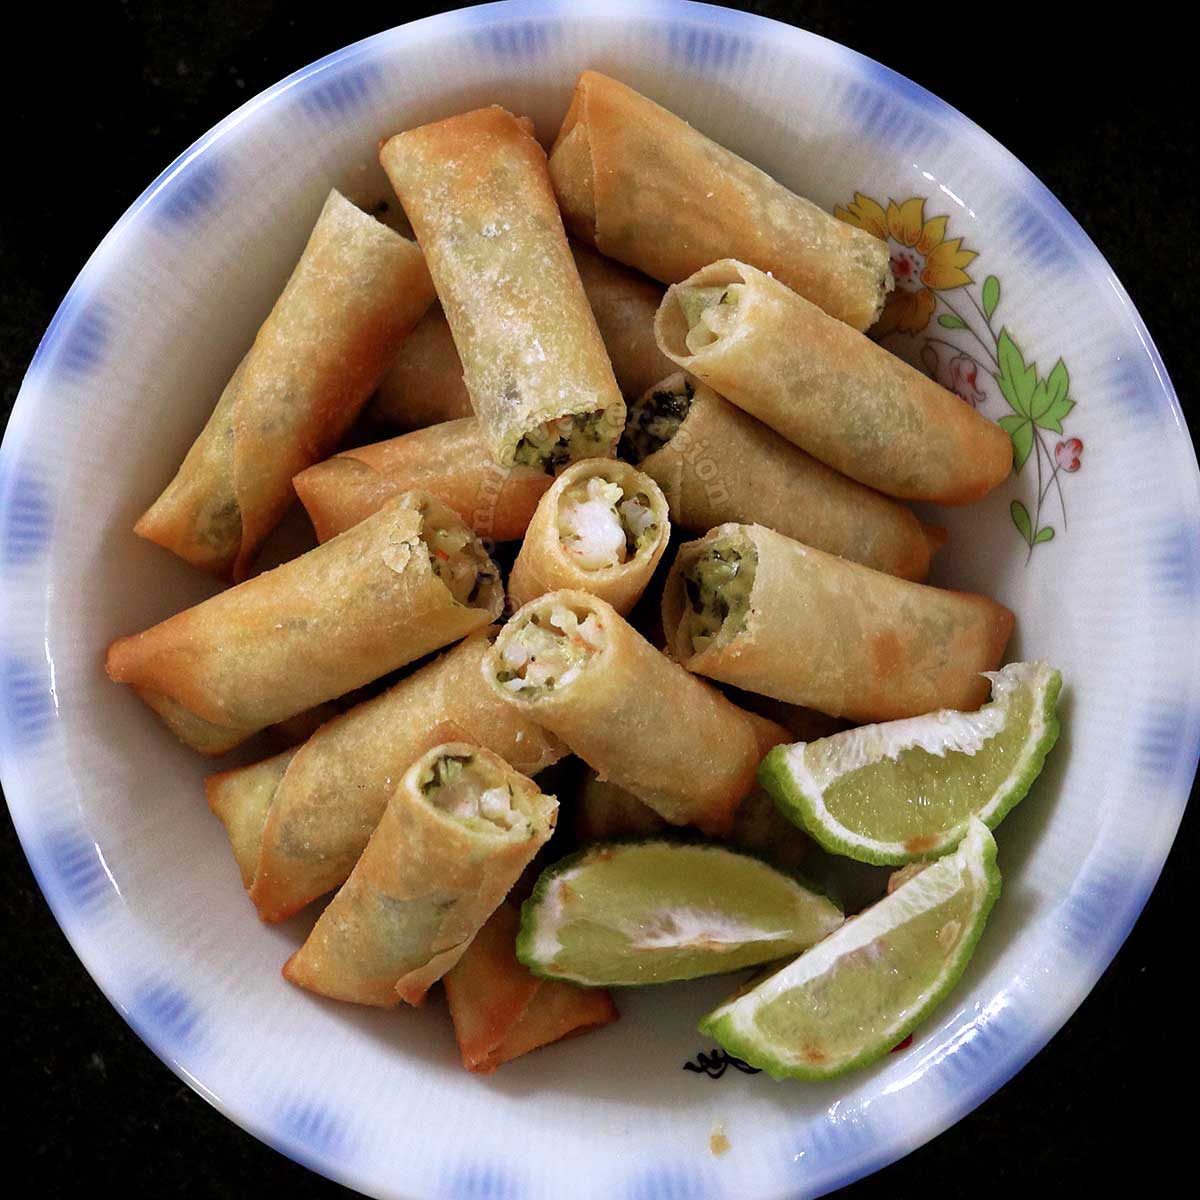 Fried spring rolls with shrimp, spinach and cream cheese filling